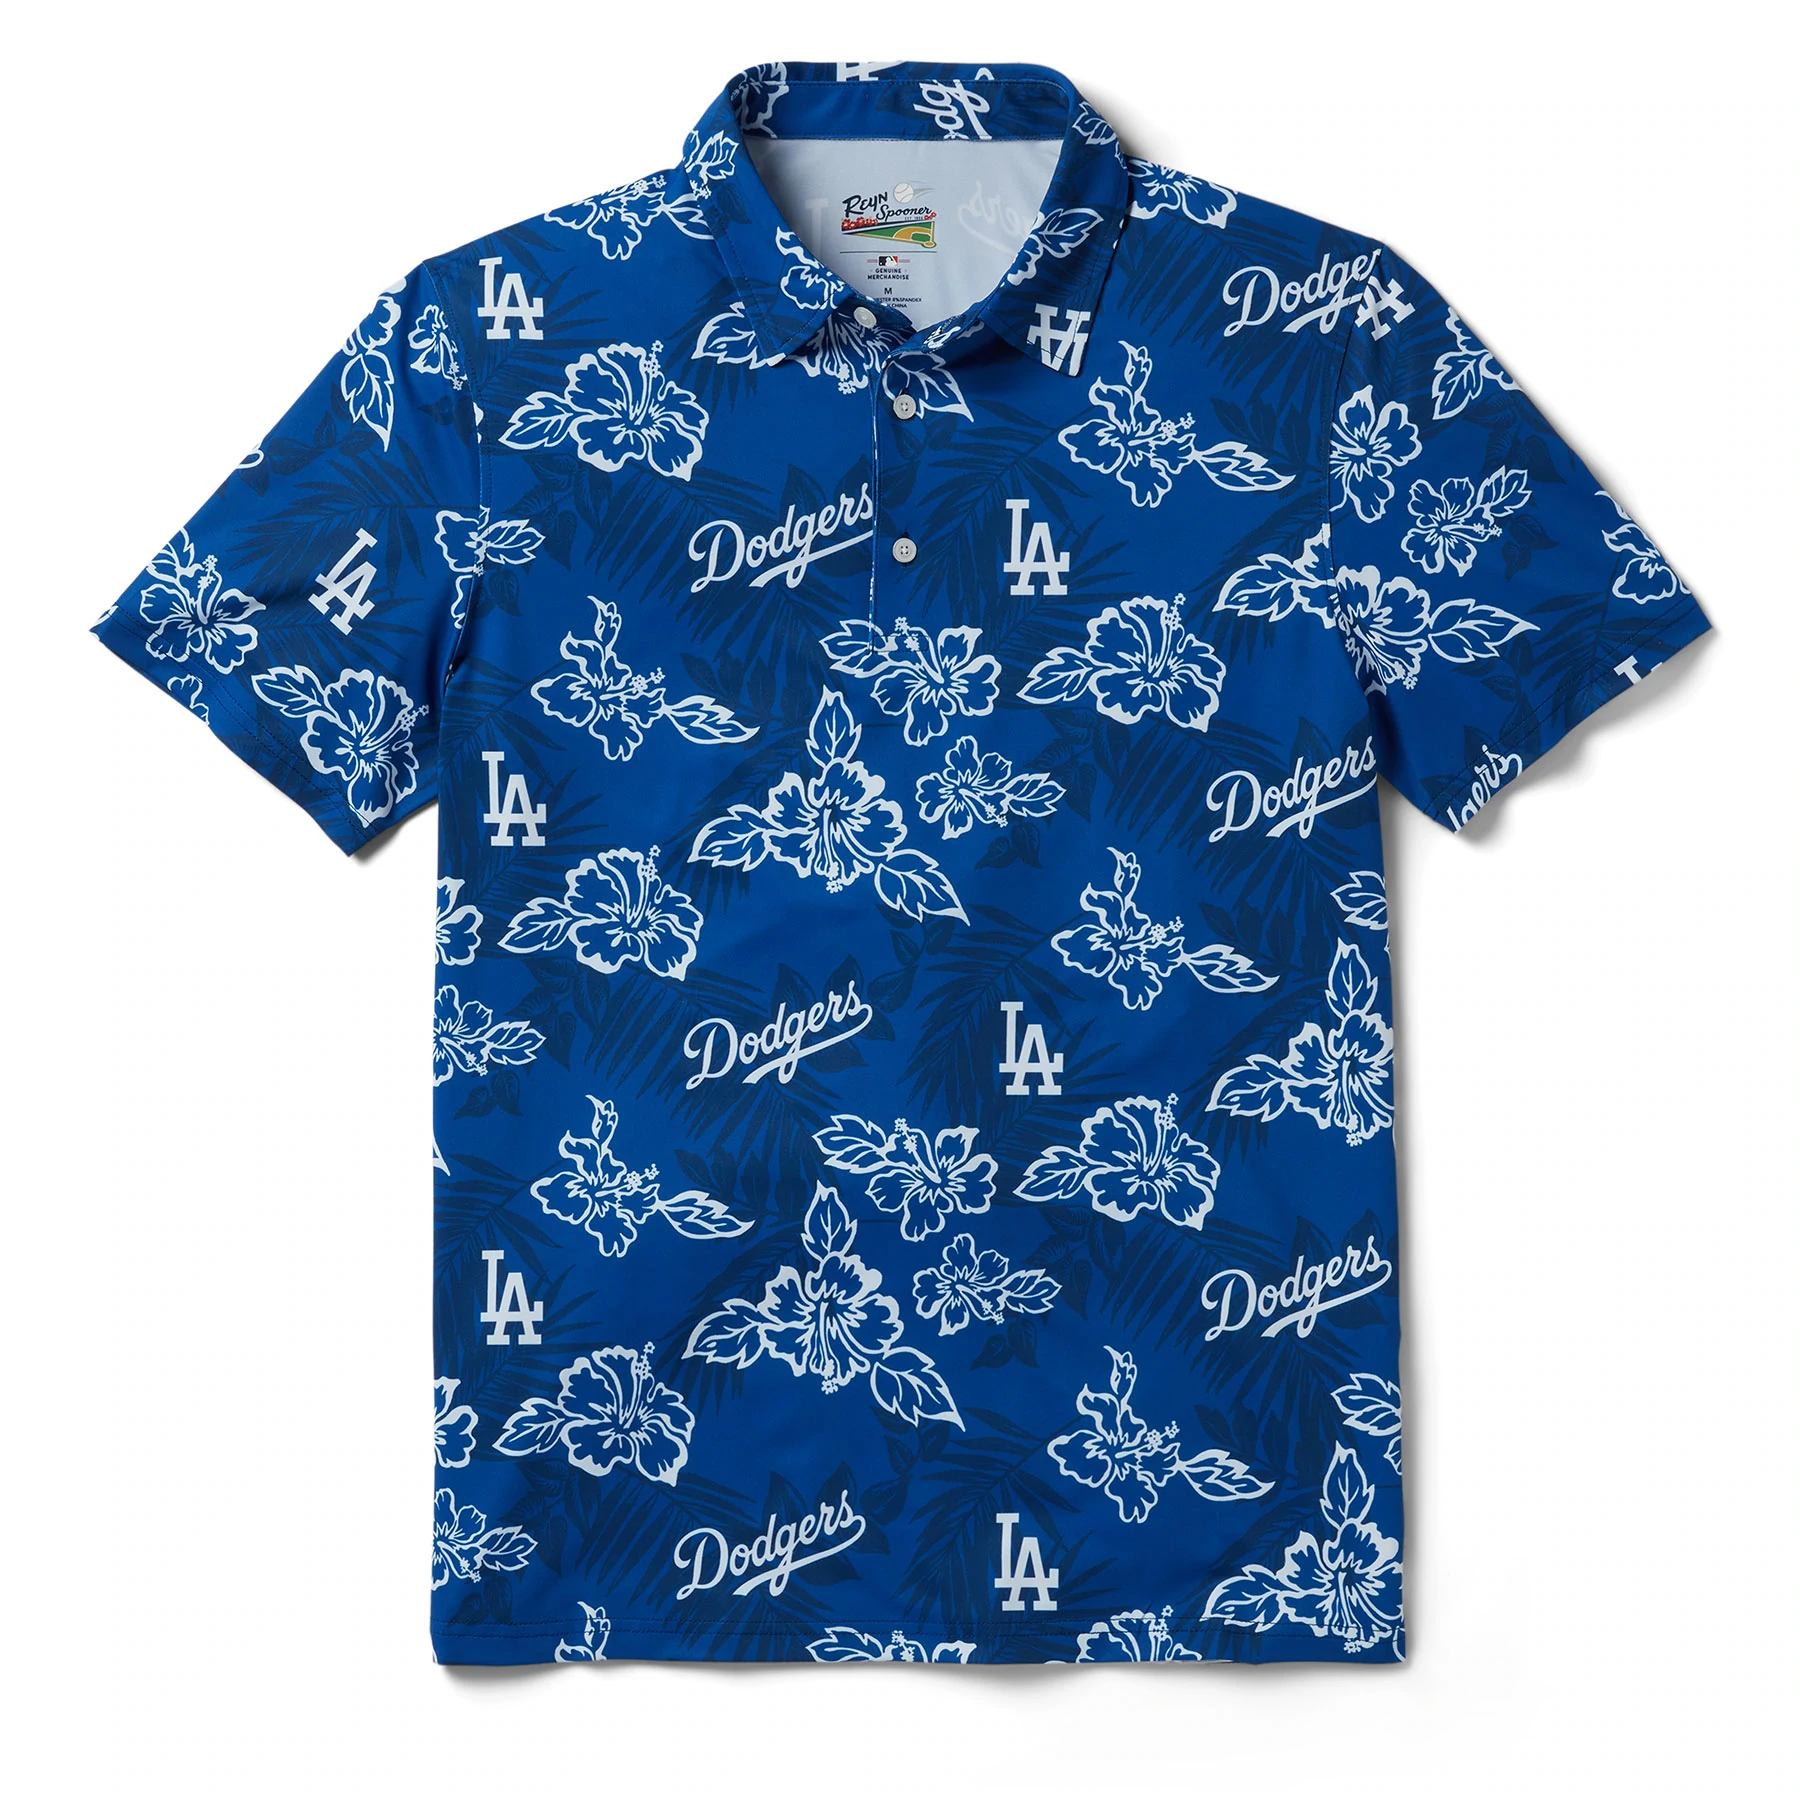 Official Tommy Bahama L.A. Dodgers Apparel, Tommy Bahama Dodgers